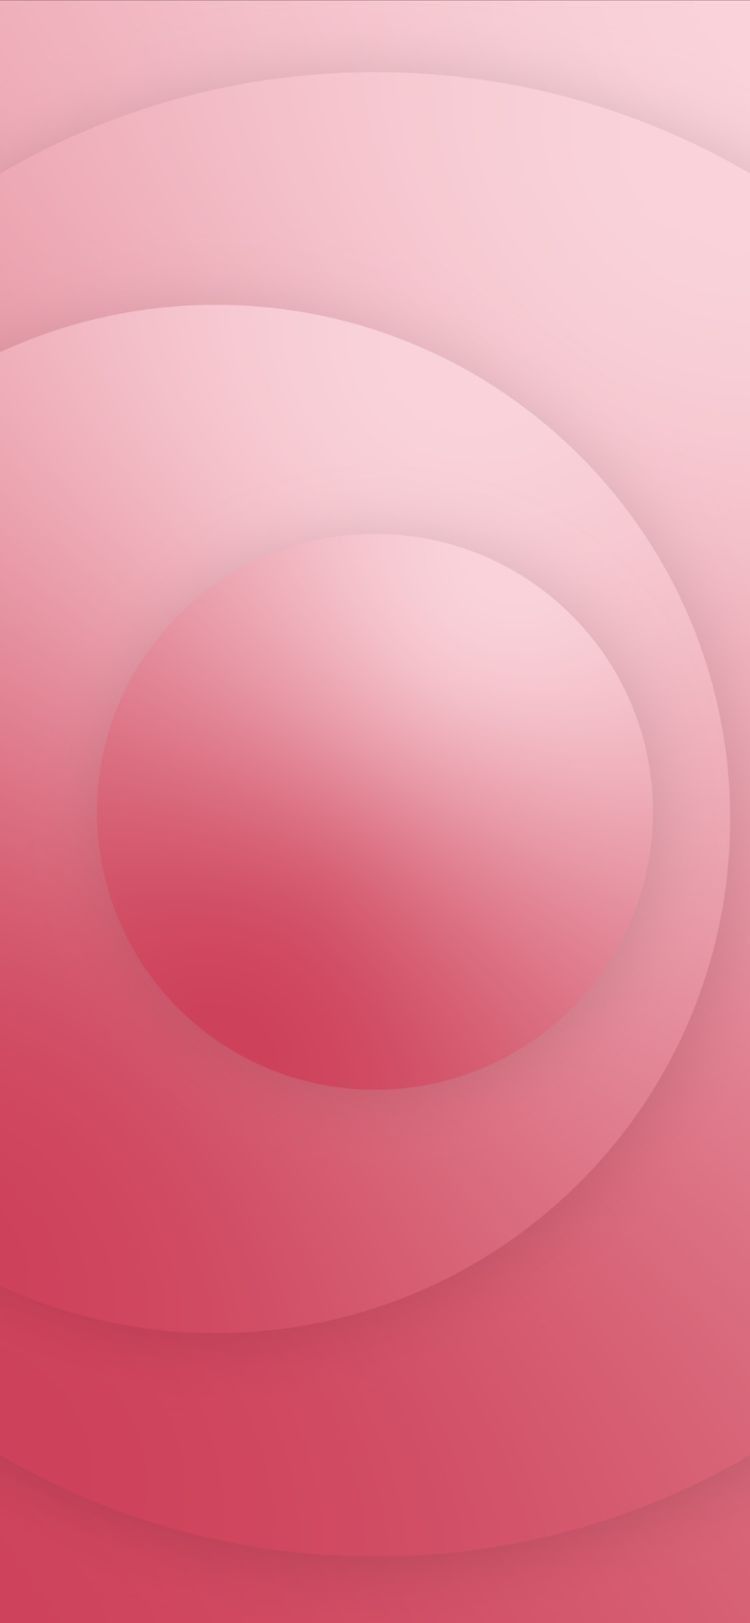 Ios Pink White Background Wallpaper For iPhone Pro Max